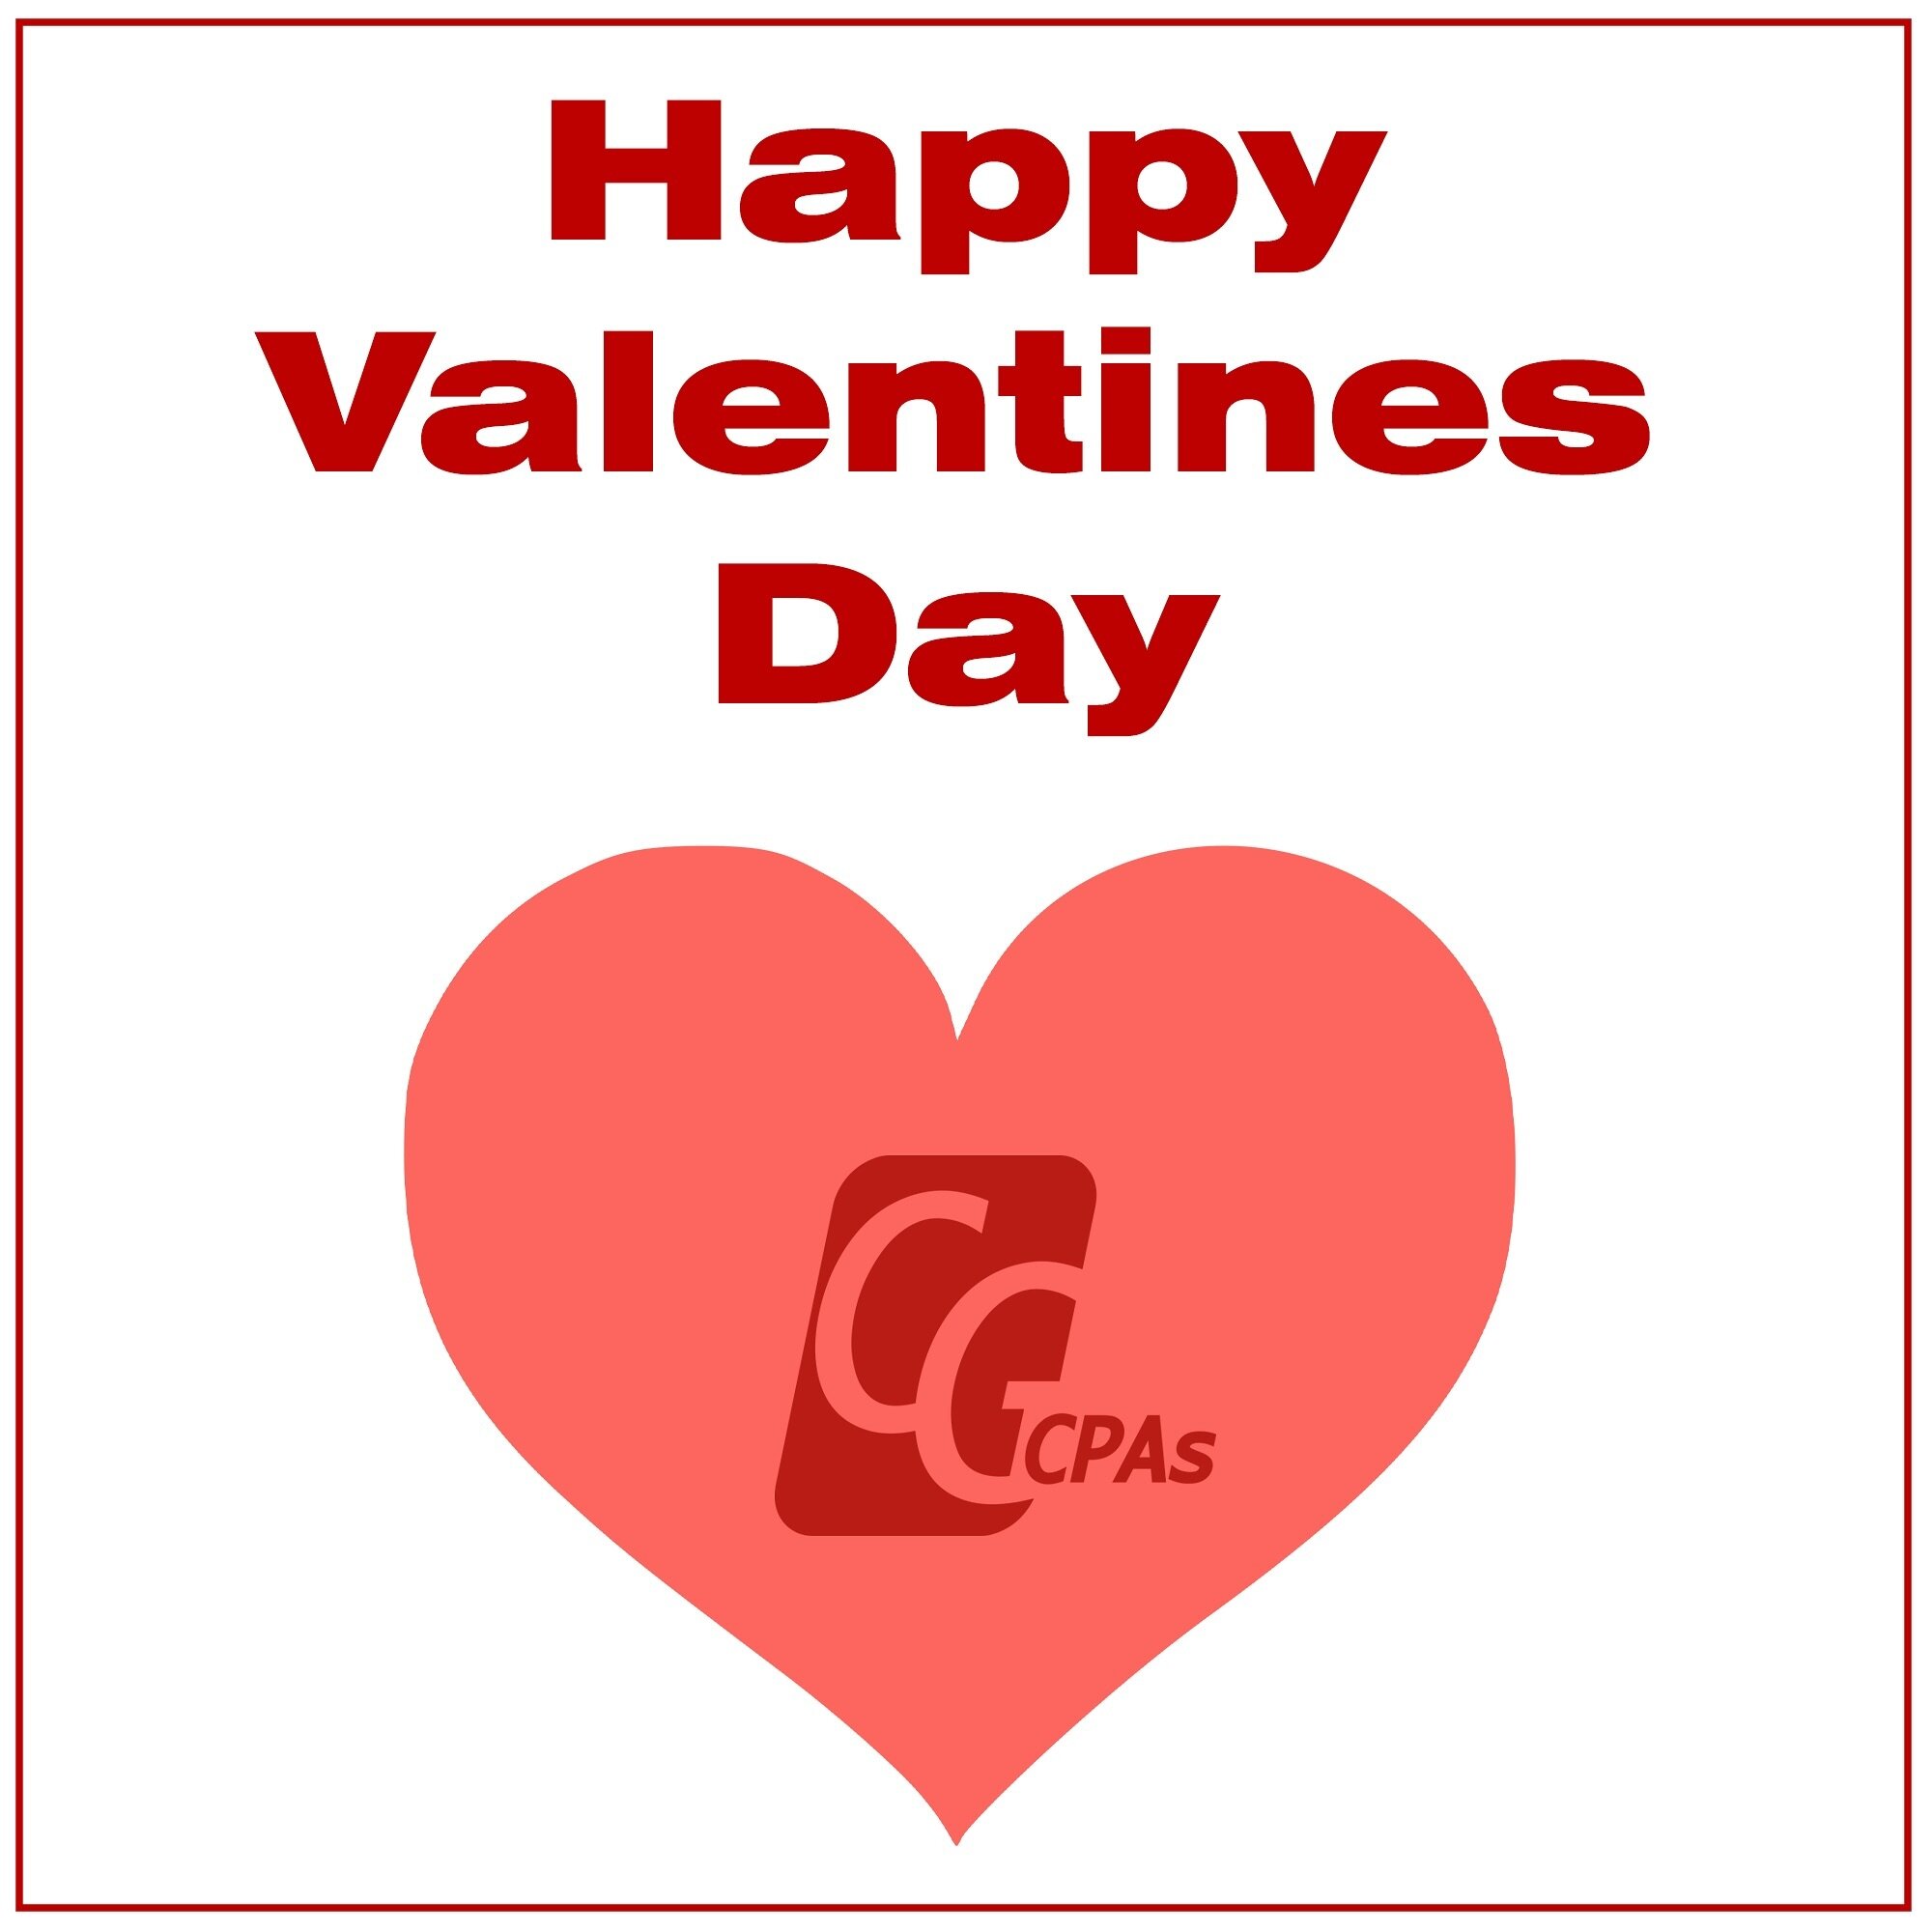 Happy Valentines Day from CG CPAs!